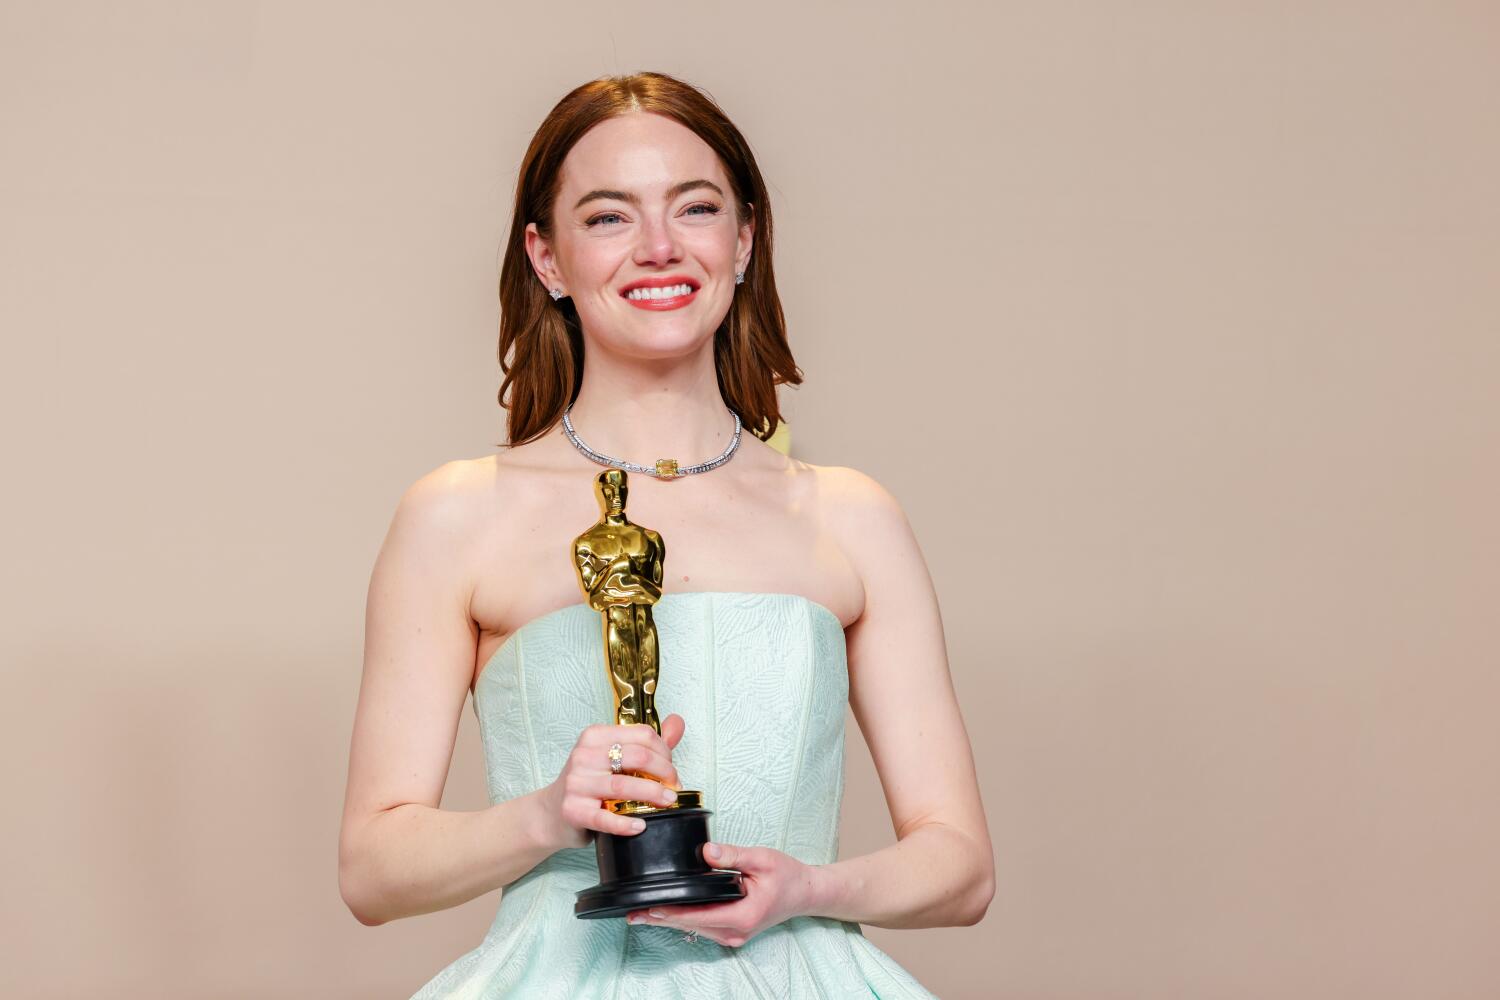 Emma Stone would like to be called by her real name, if you don't mind